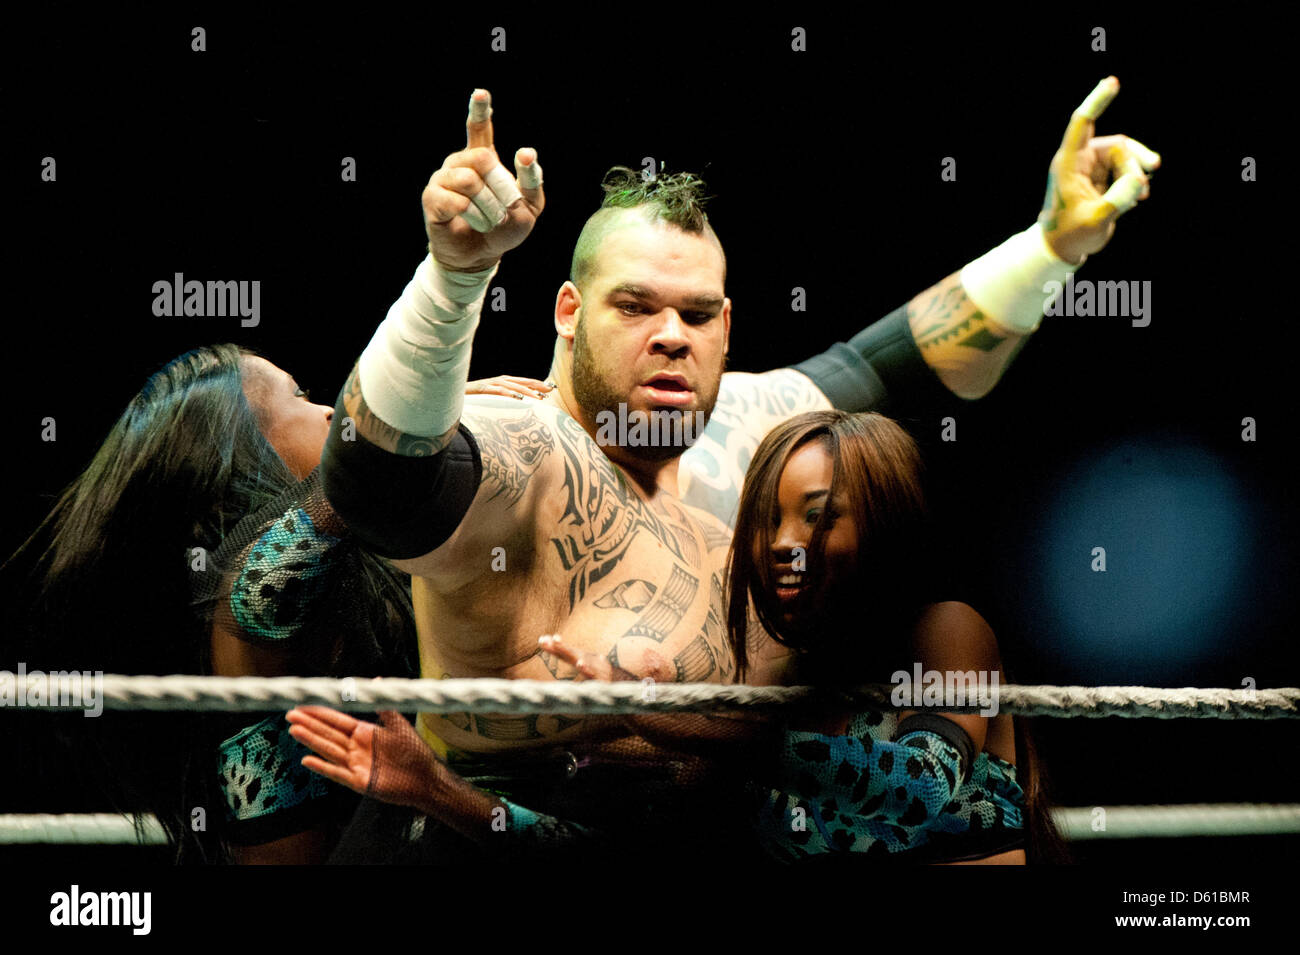 US-wrestler Funkasaurus cheers after a fight at the RAW WrestleMania Revenge Tour at the o2 World canue in Berlin, Germany, 14 April 2012. The WWE (World Wrestling Entertainment) celebrates its 20th German anniversary this April. The first show in Germany was staged in Kiel, Germany, in April 1992. Photo: Sebastian Kahnert Stock Photo